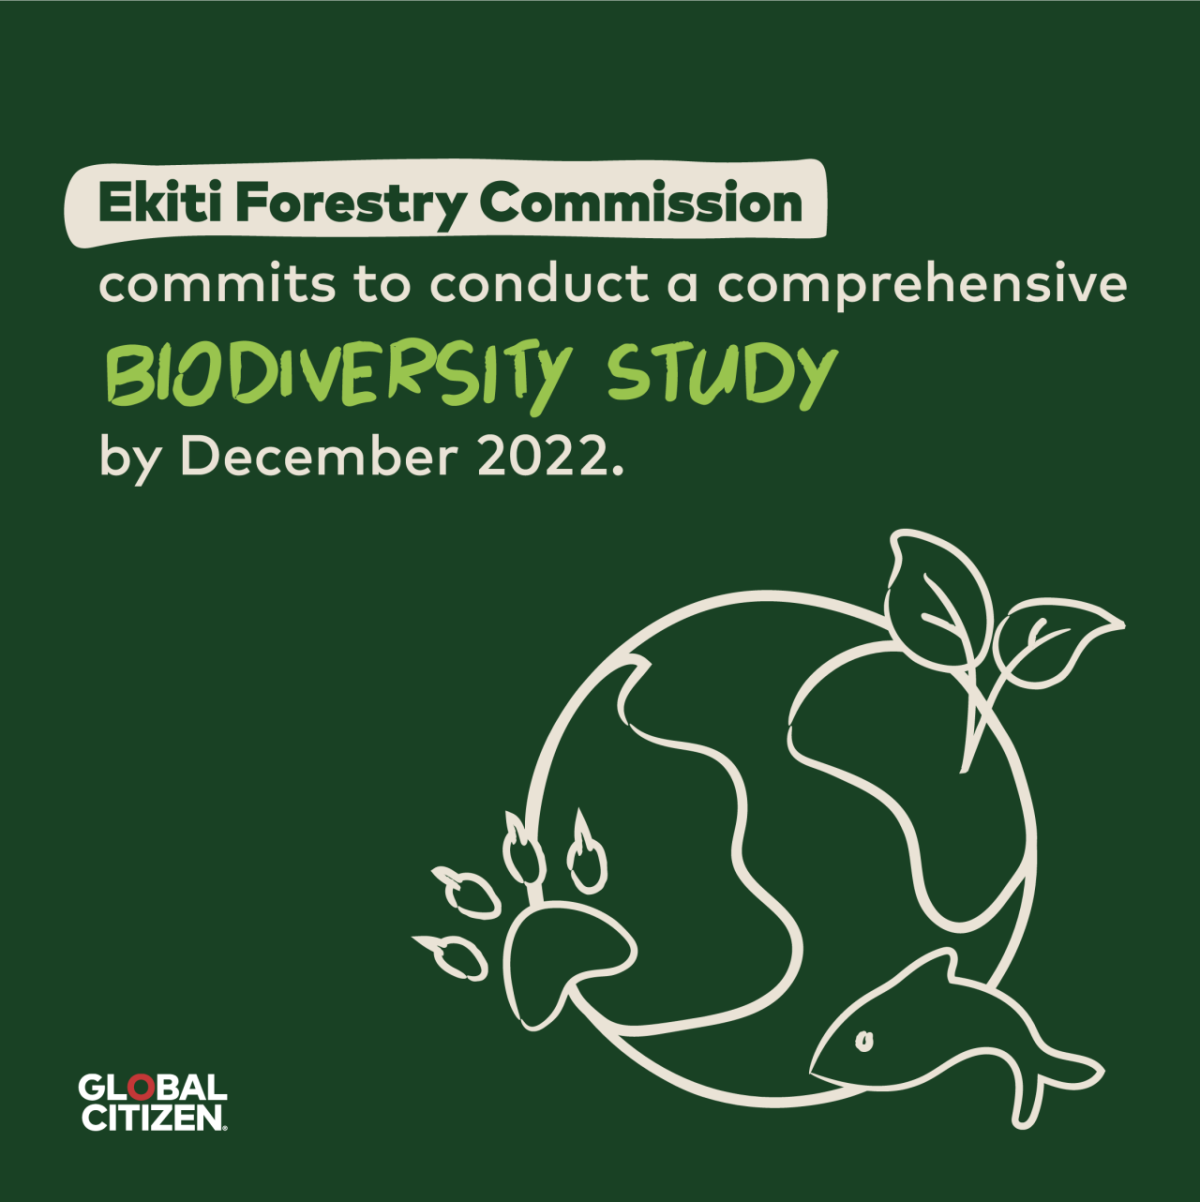 Ekiti Forestry Commission commits to conduct a comprehensive Biodiversity Study by December 2022.